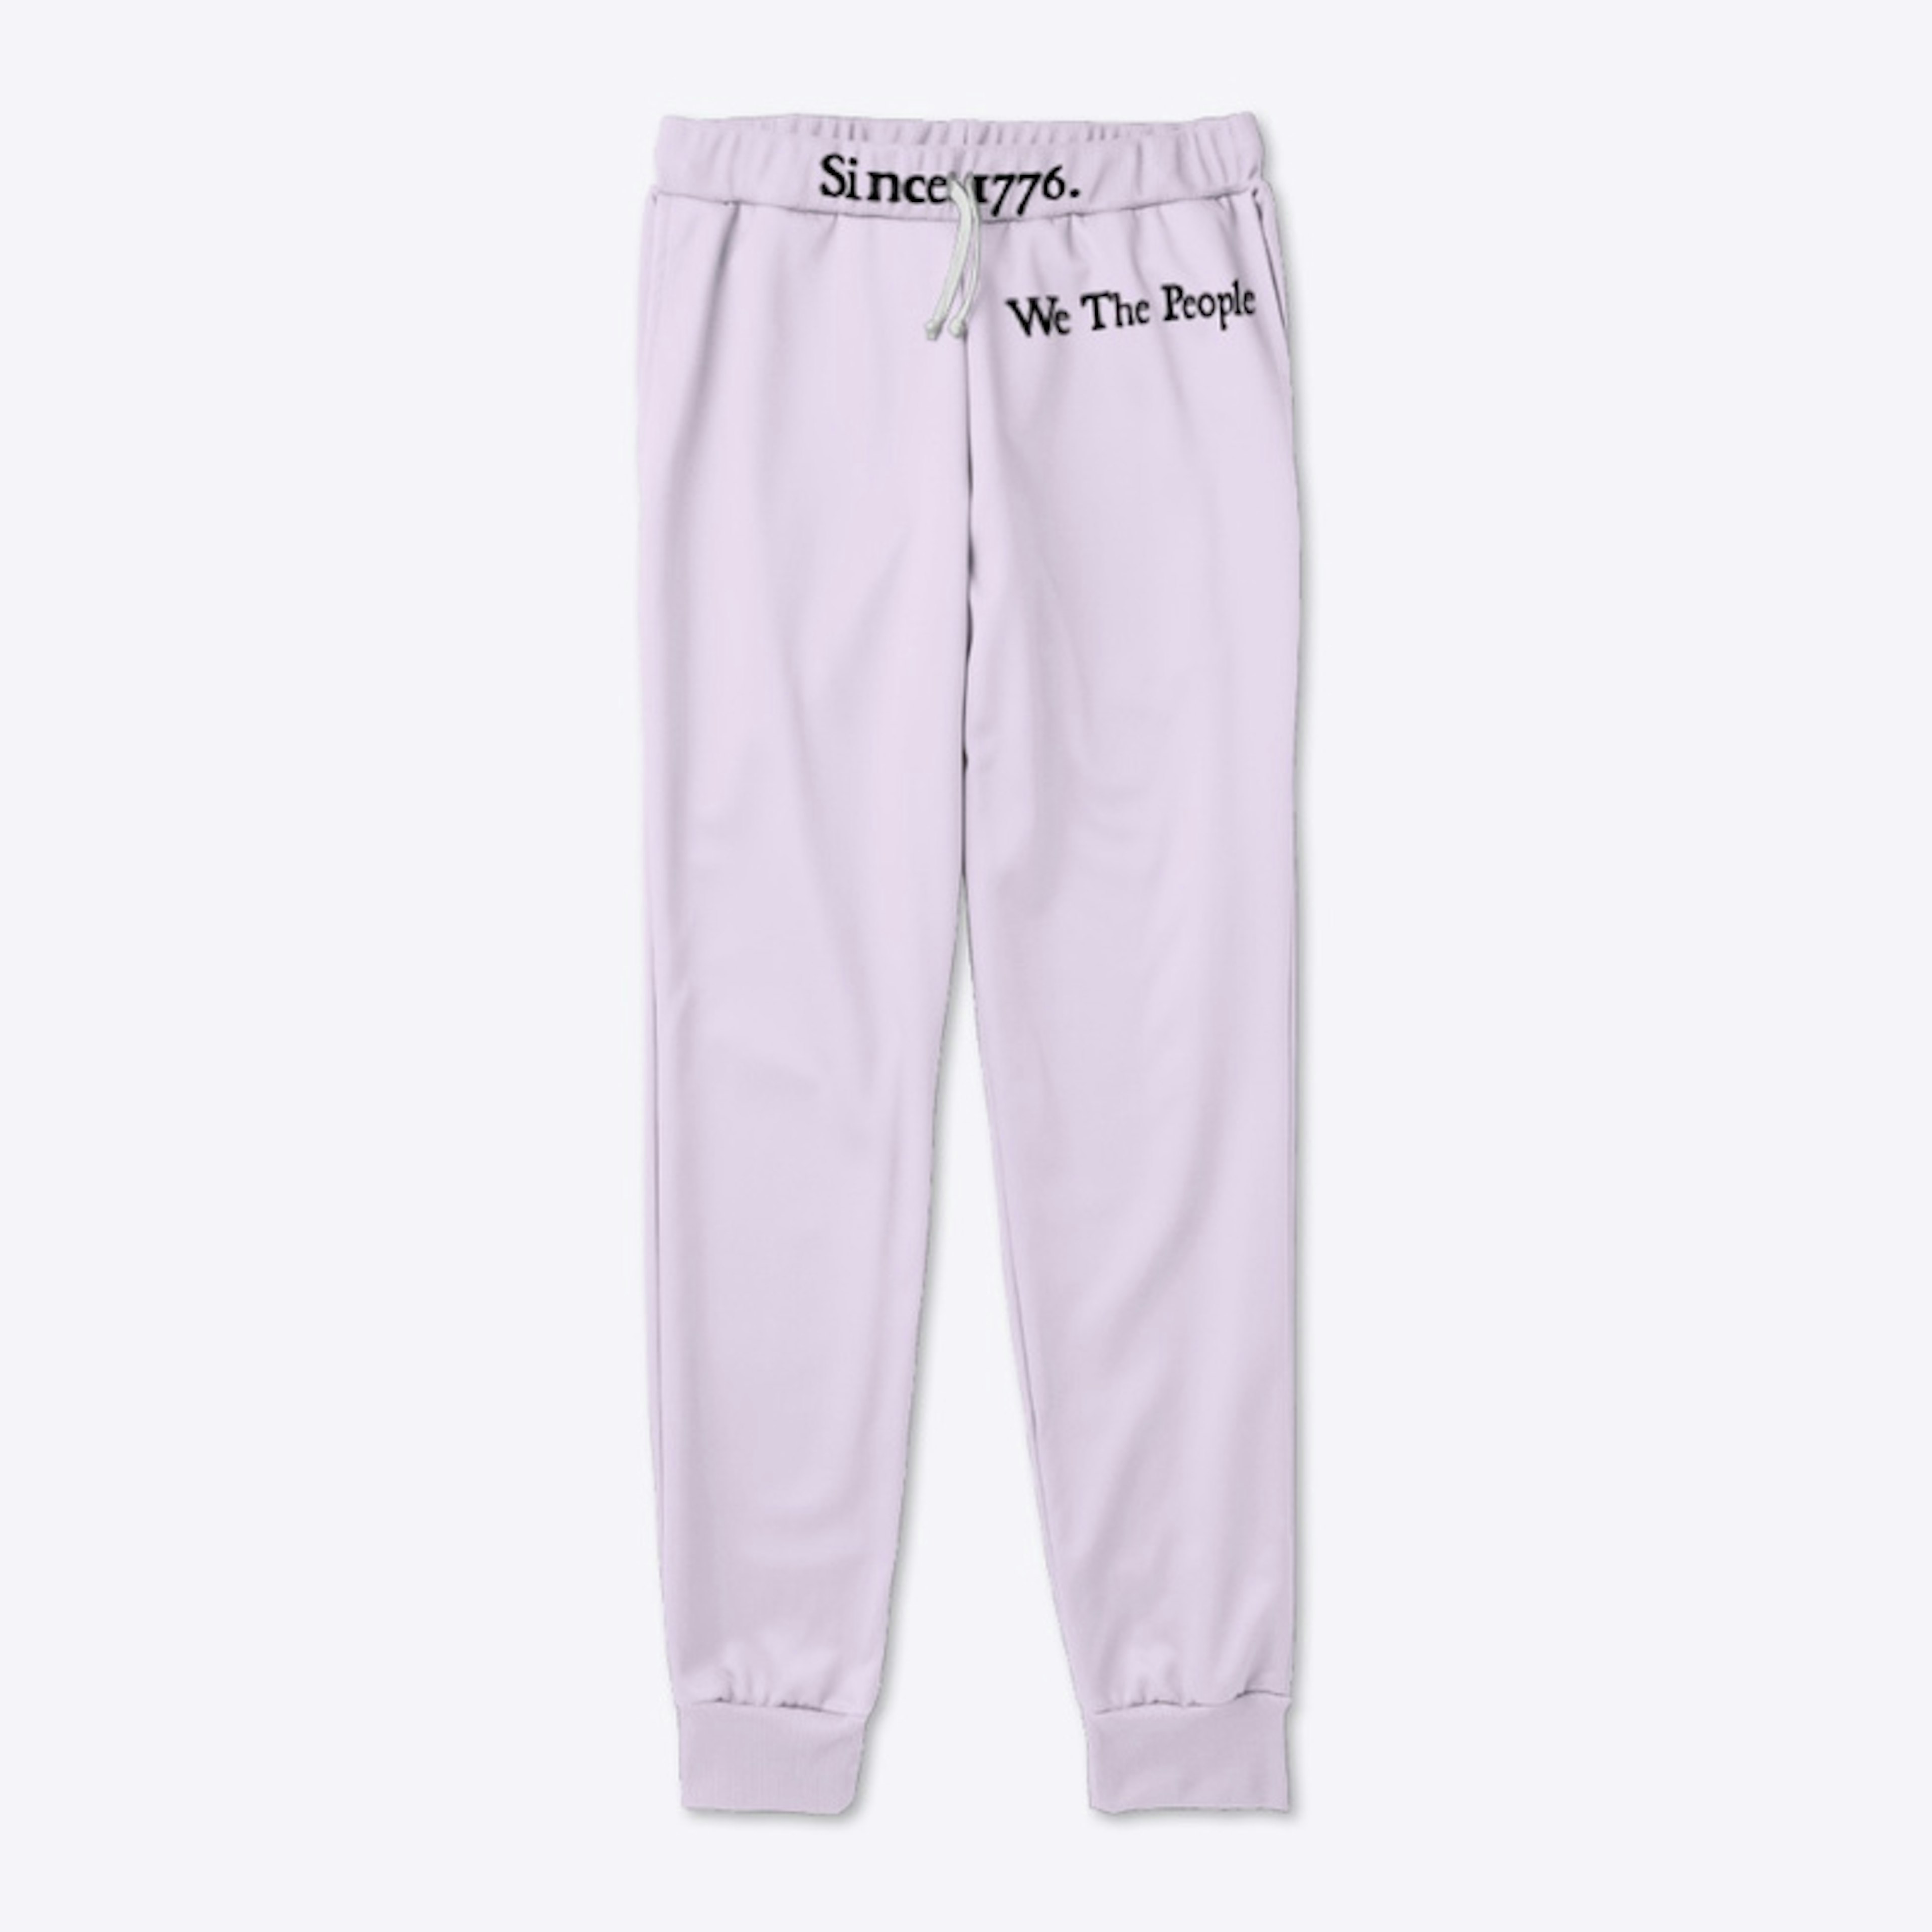 We The People Joggers